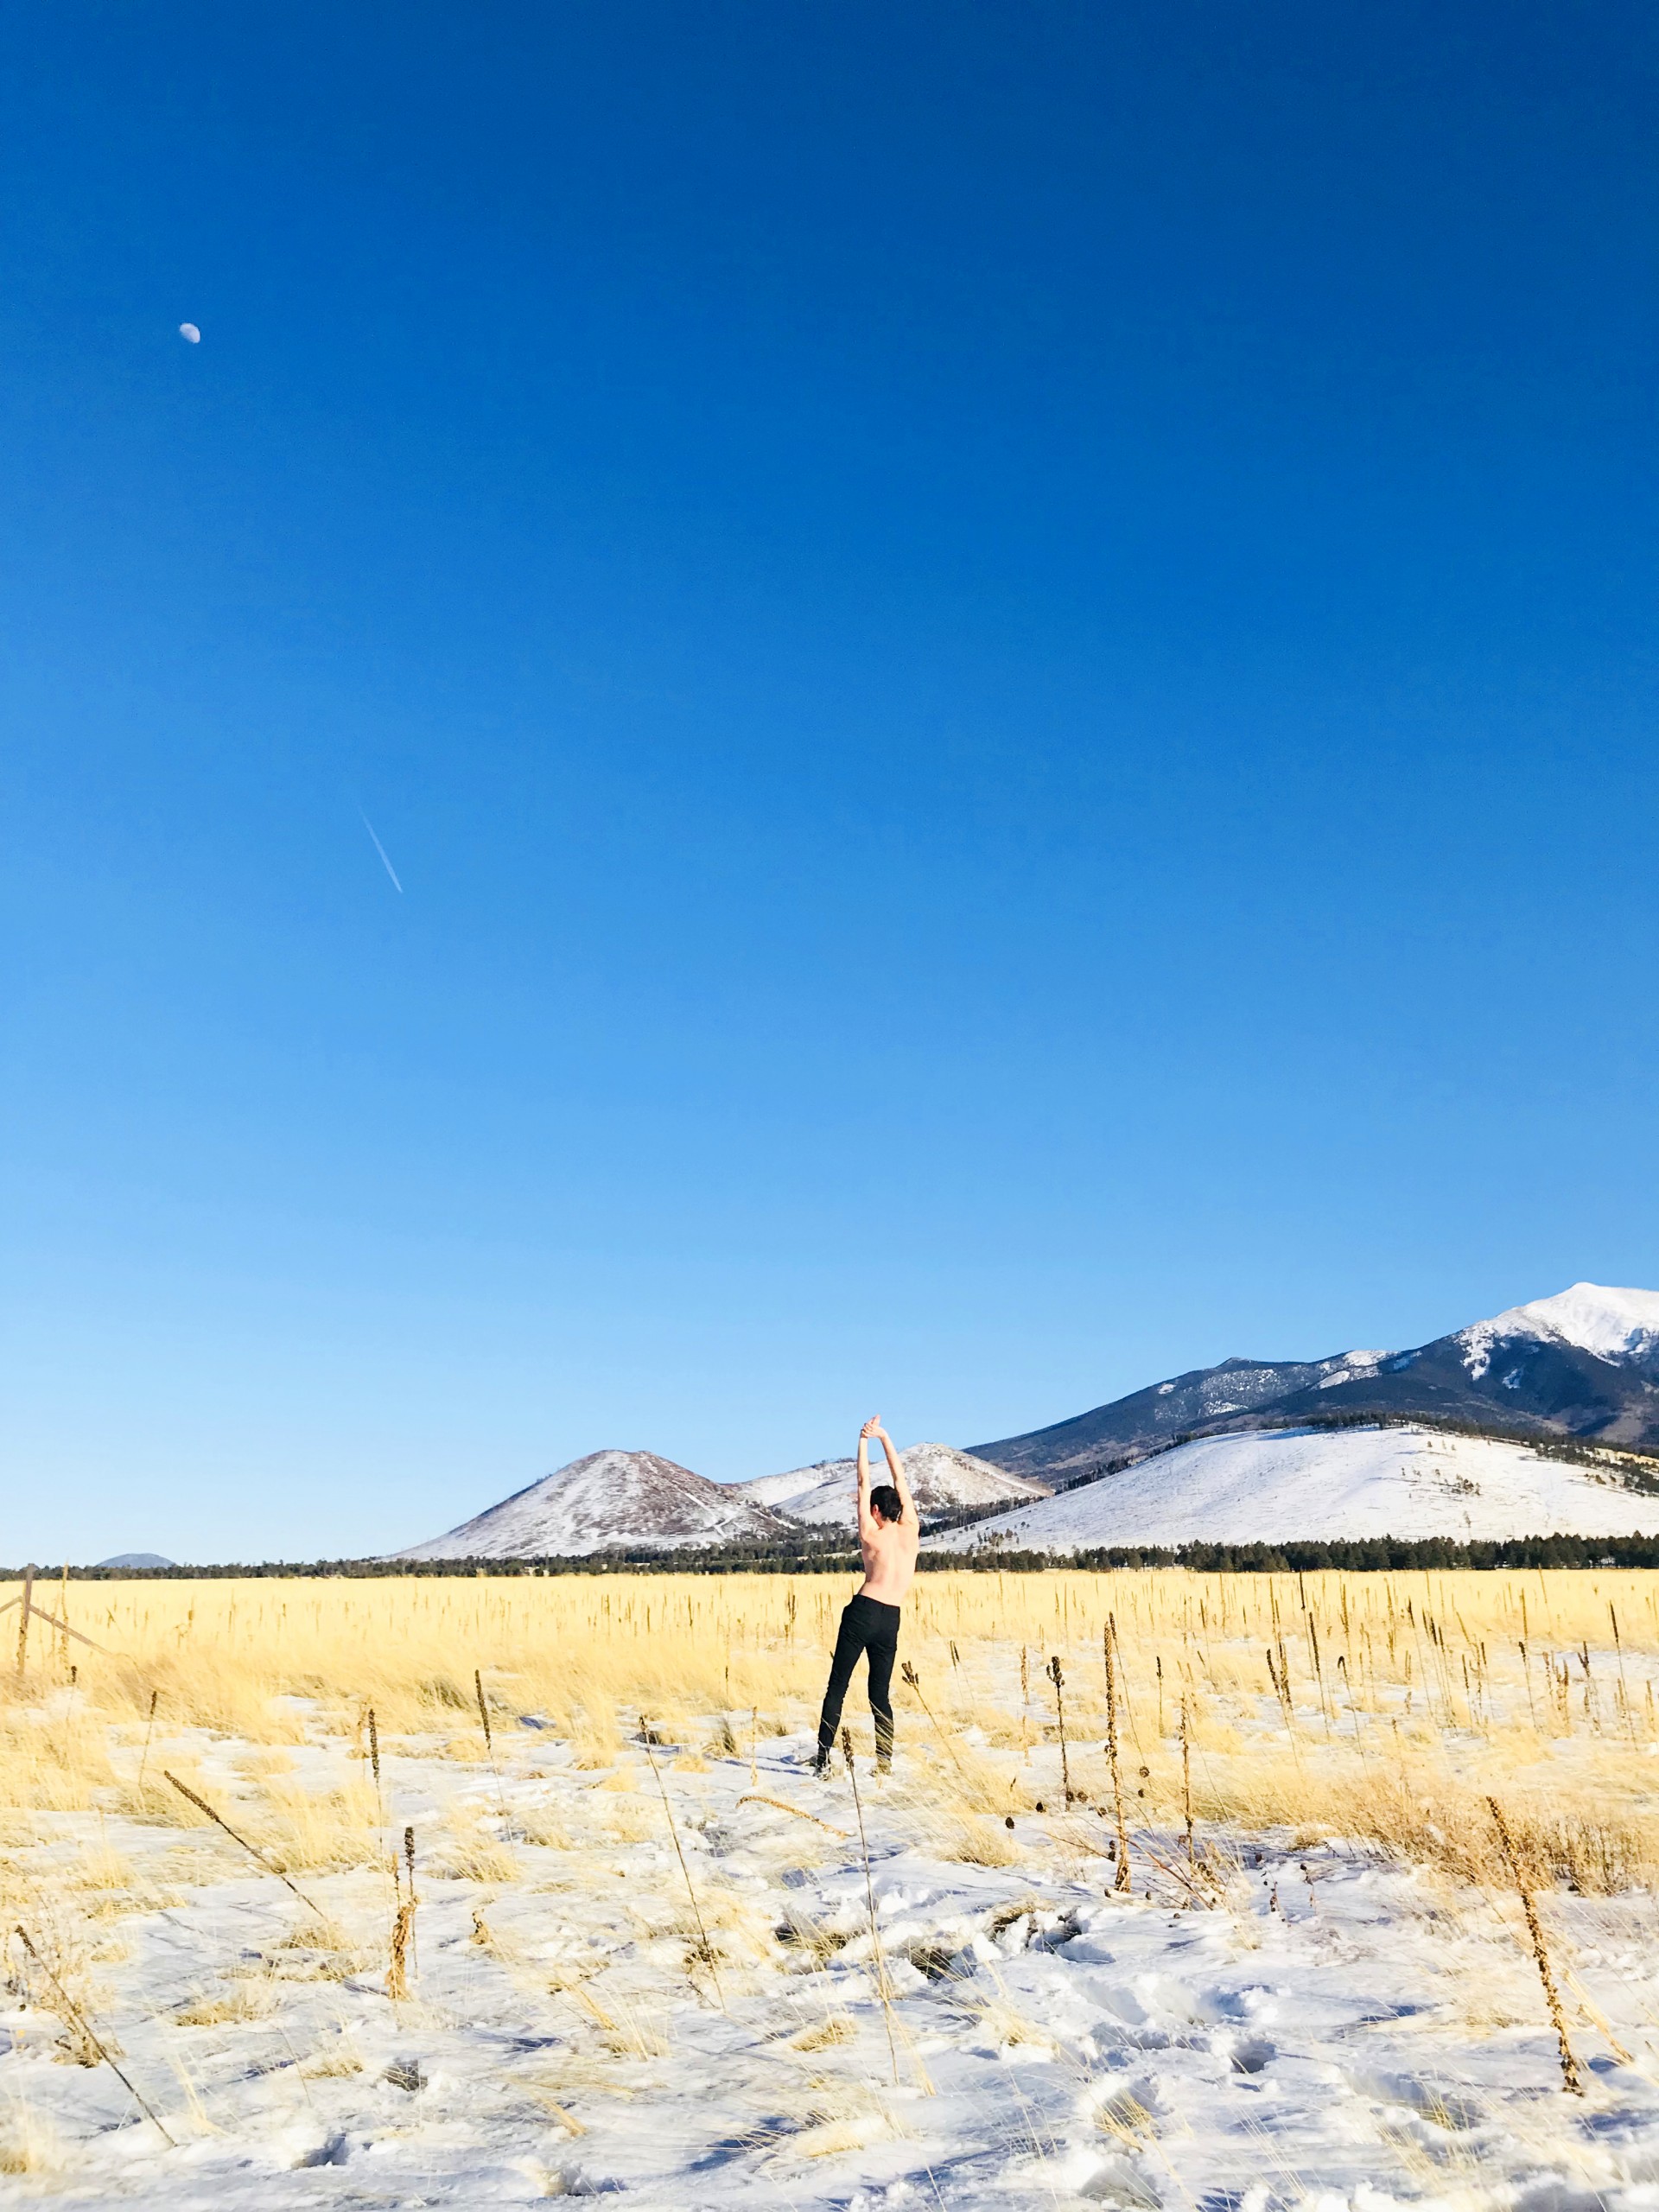 Photograph of snowy wheat field. Male model stands with back towards viewer in center of image. Body is slightly curved. Sky is blue. 